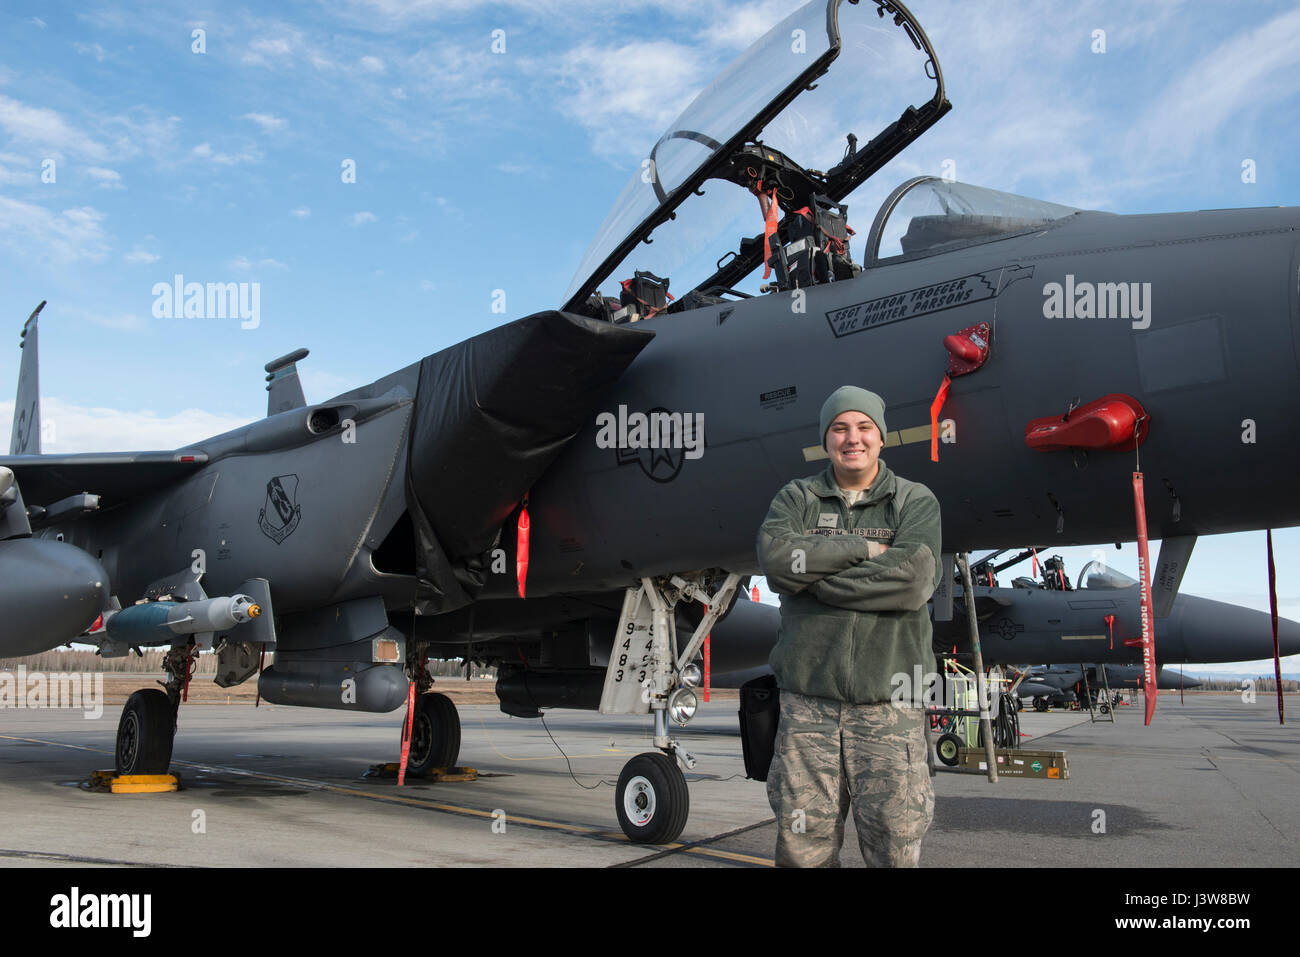 EIELSON AIR FORCE BASE, Alaska – U.S. Air Force Airman 1st Class Ryan Landrum, a 335th Aircraft Maintenance Unit weapons load crew member assigned to Seymour Johnson Air Force Base, N.C., poses for a photo in front of an F-15E Strike Eagle dual-role fighter aircraft from the 335th Fighter Squadron, May 4, 2017 during NORTHERN EDGE 2017 (NE17), at Eielson Air Force Base, Alaska. NE17 is Alaska’s premier joint training exercise designed to practice operations, techniques and procedures as well as enhance interoperability among the services. Thousands of participants from all the services, Airmen Stock Photo